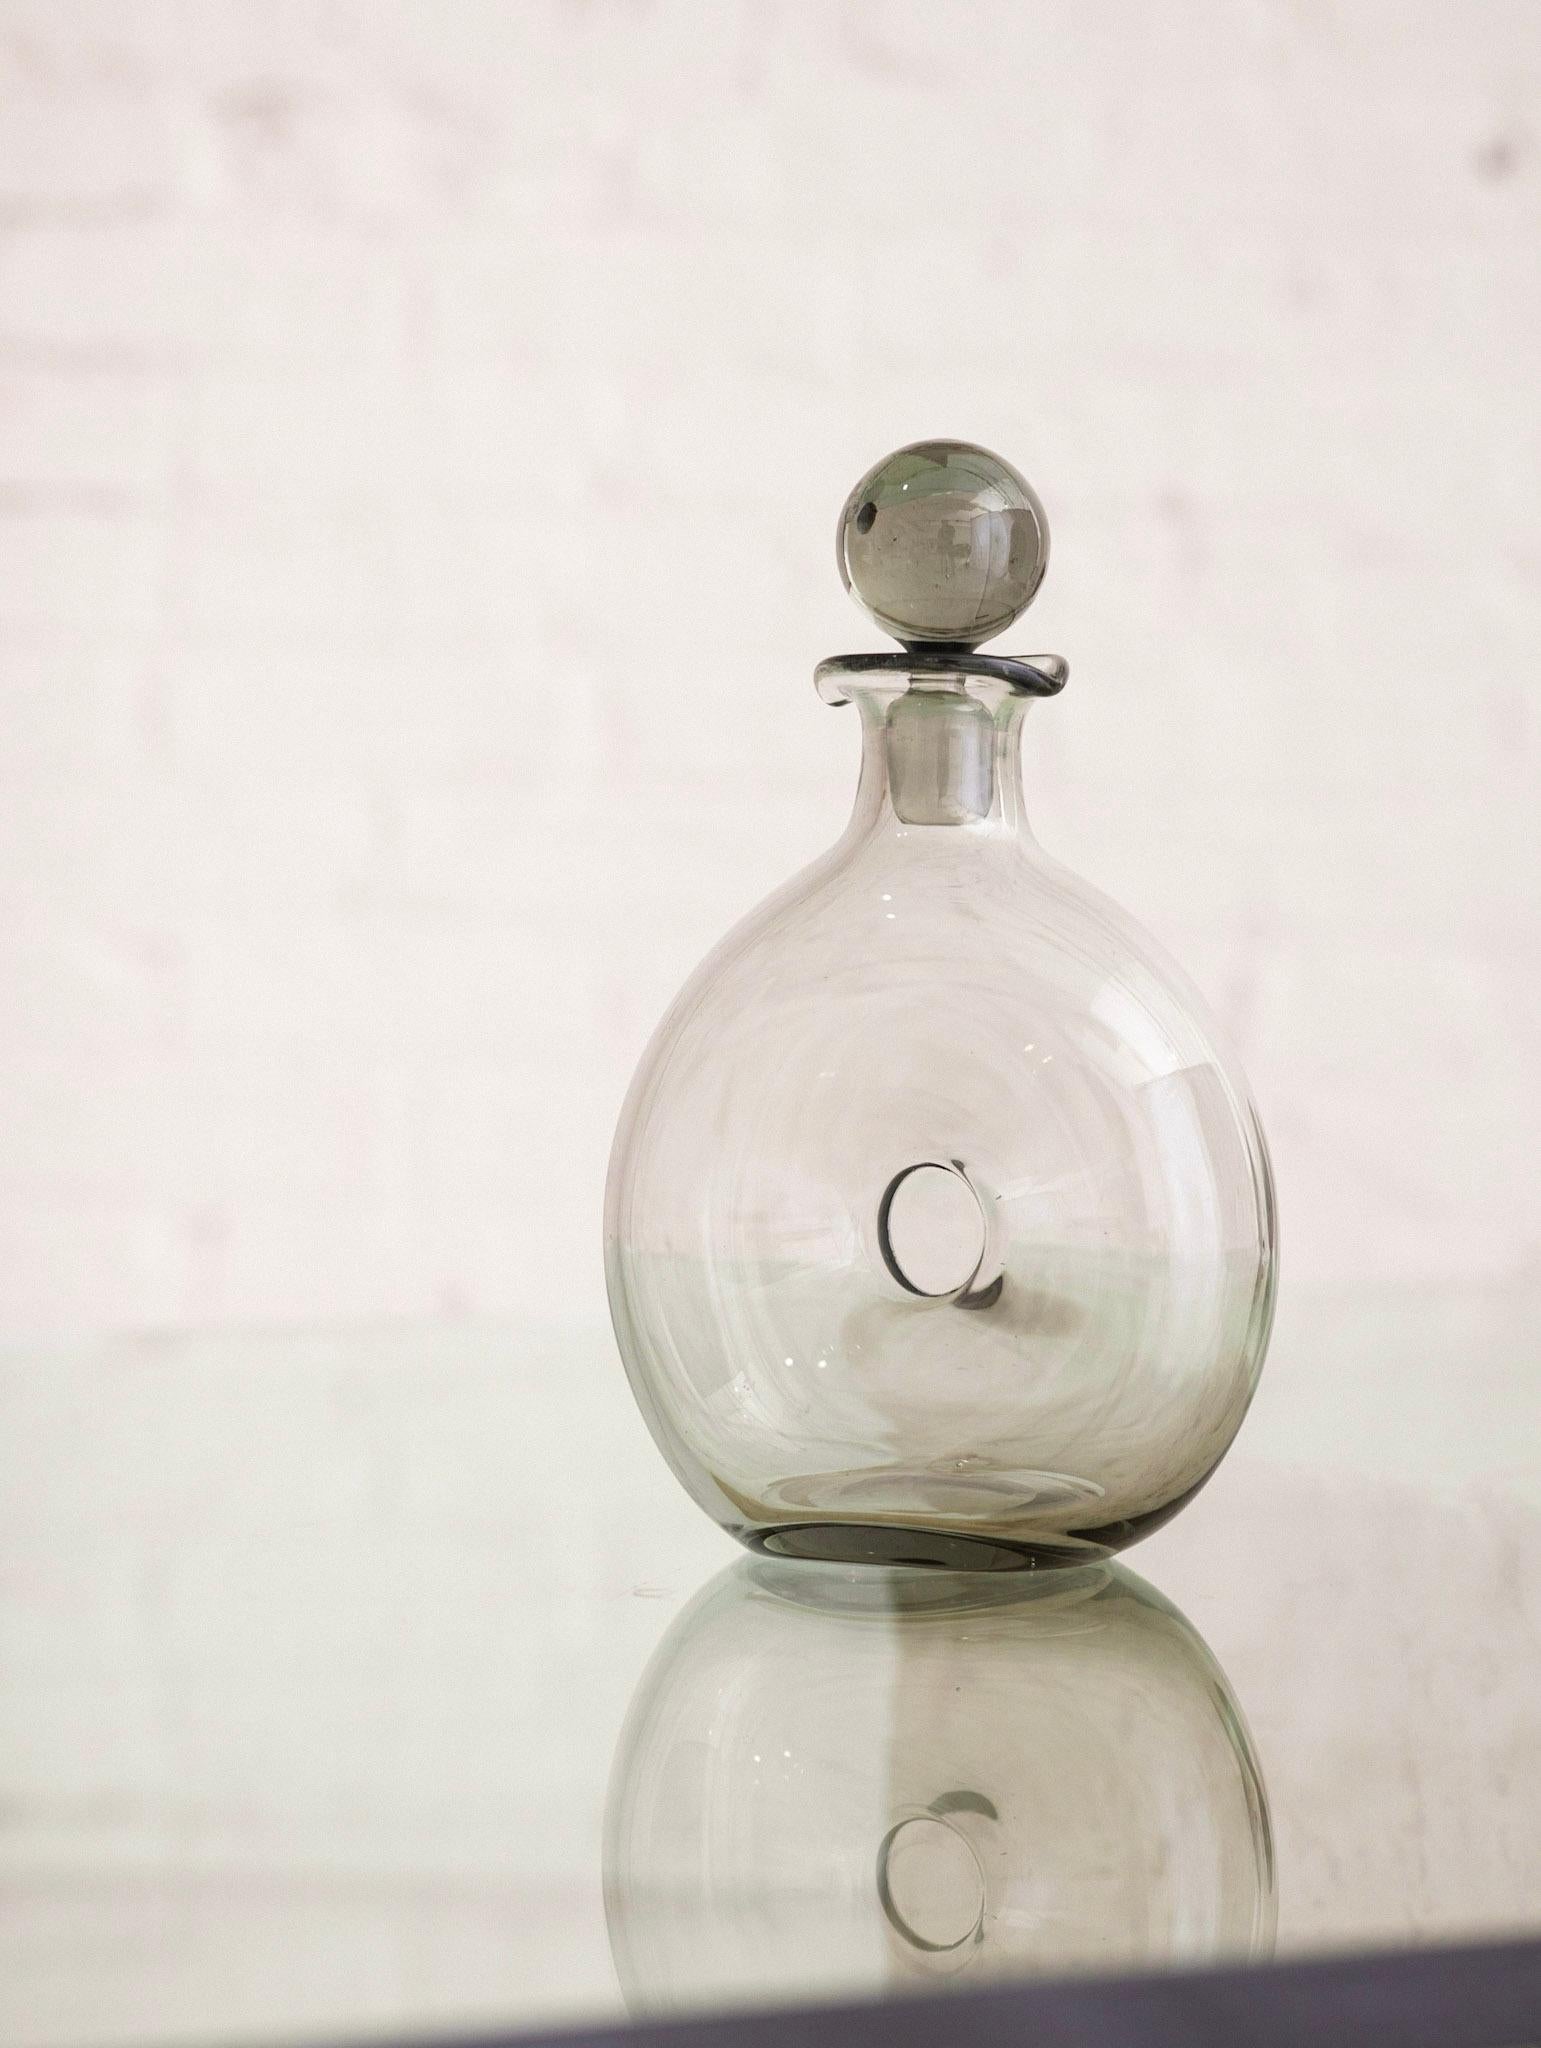 Mid Century blown glass “Danica” decanter by Holmegaard. Sculptural donut form. Vessel connects at center so that liquid wraps around the sides.